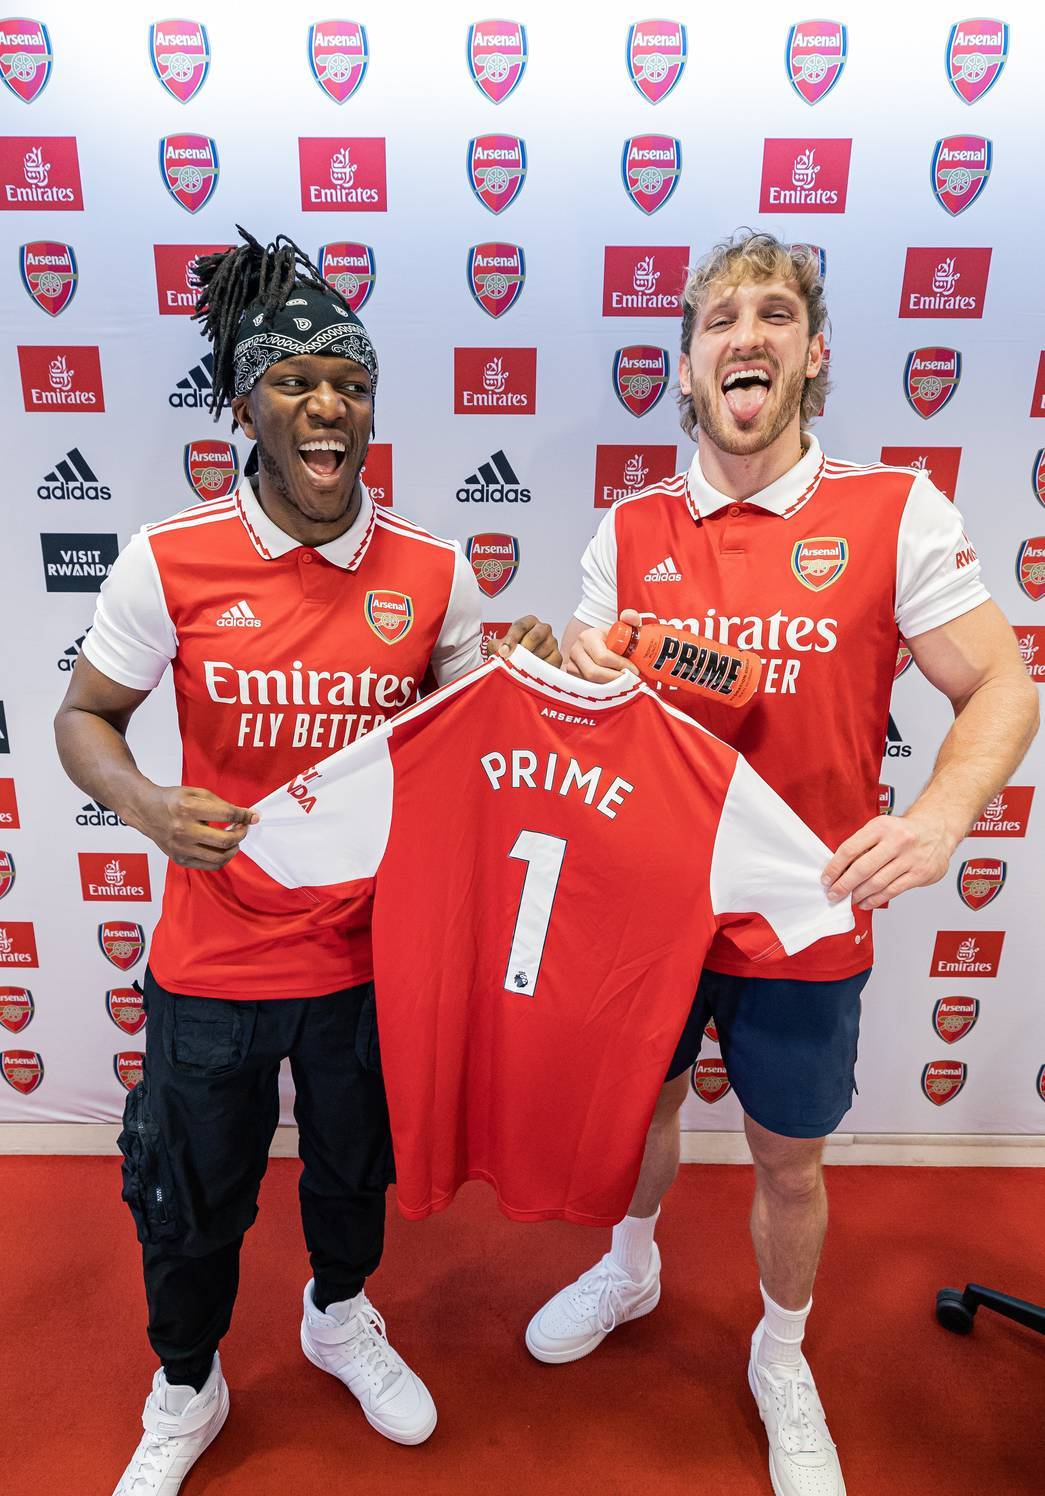 , Inside KSI and Logan Paul’s booming Prime business as YouTube sensations take world by storm – and now worth £18 MILLION